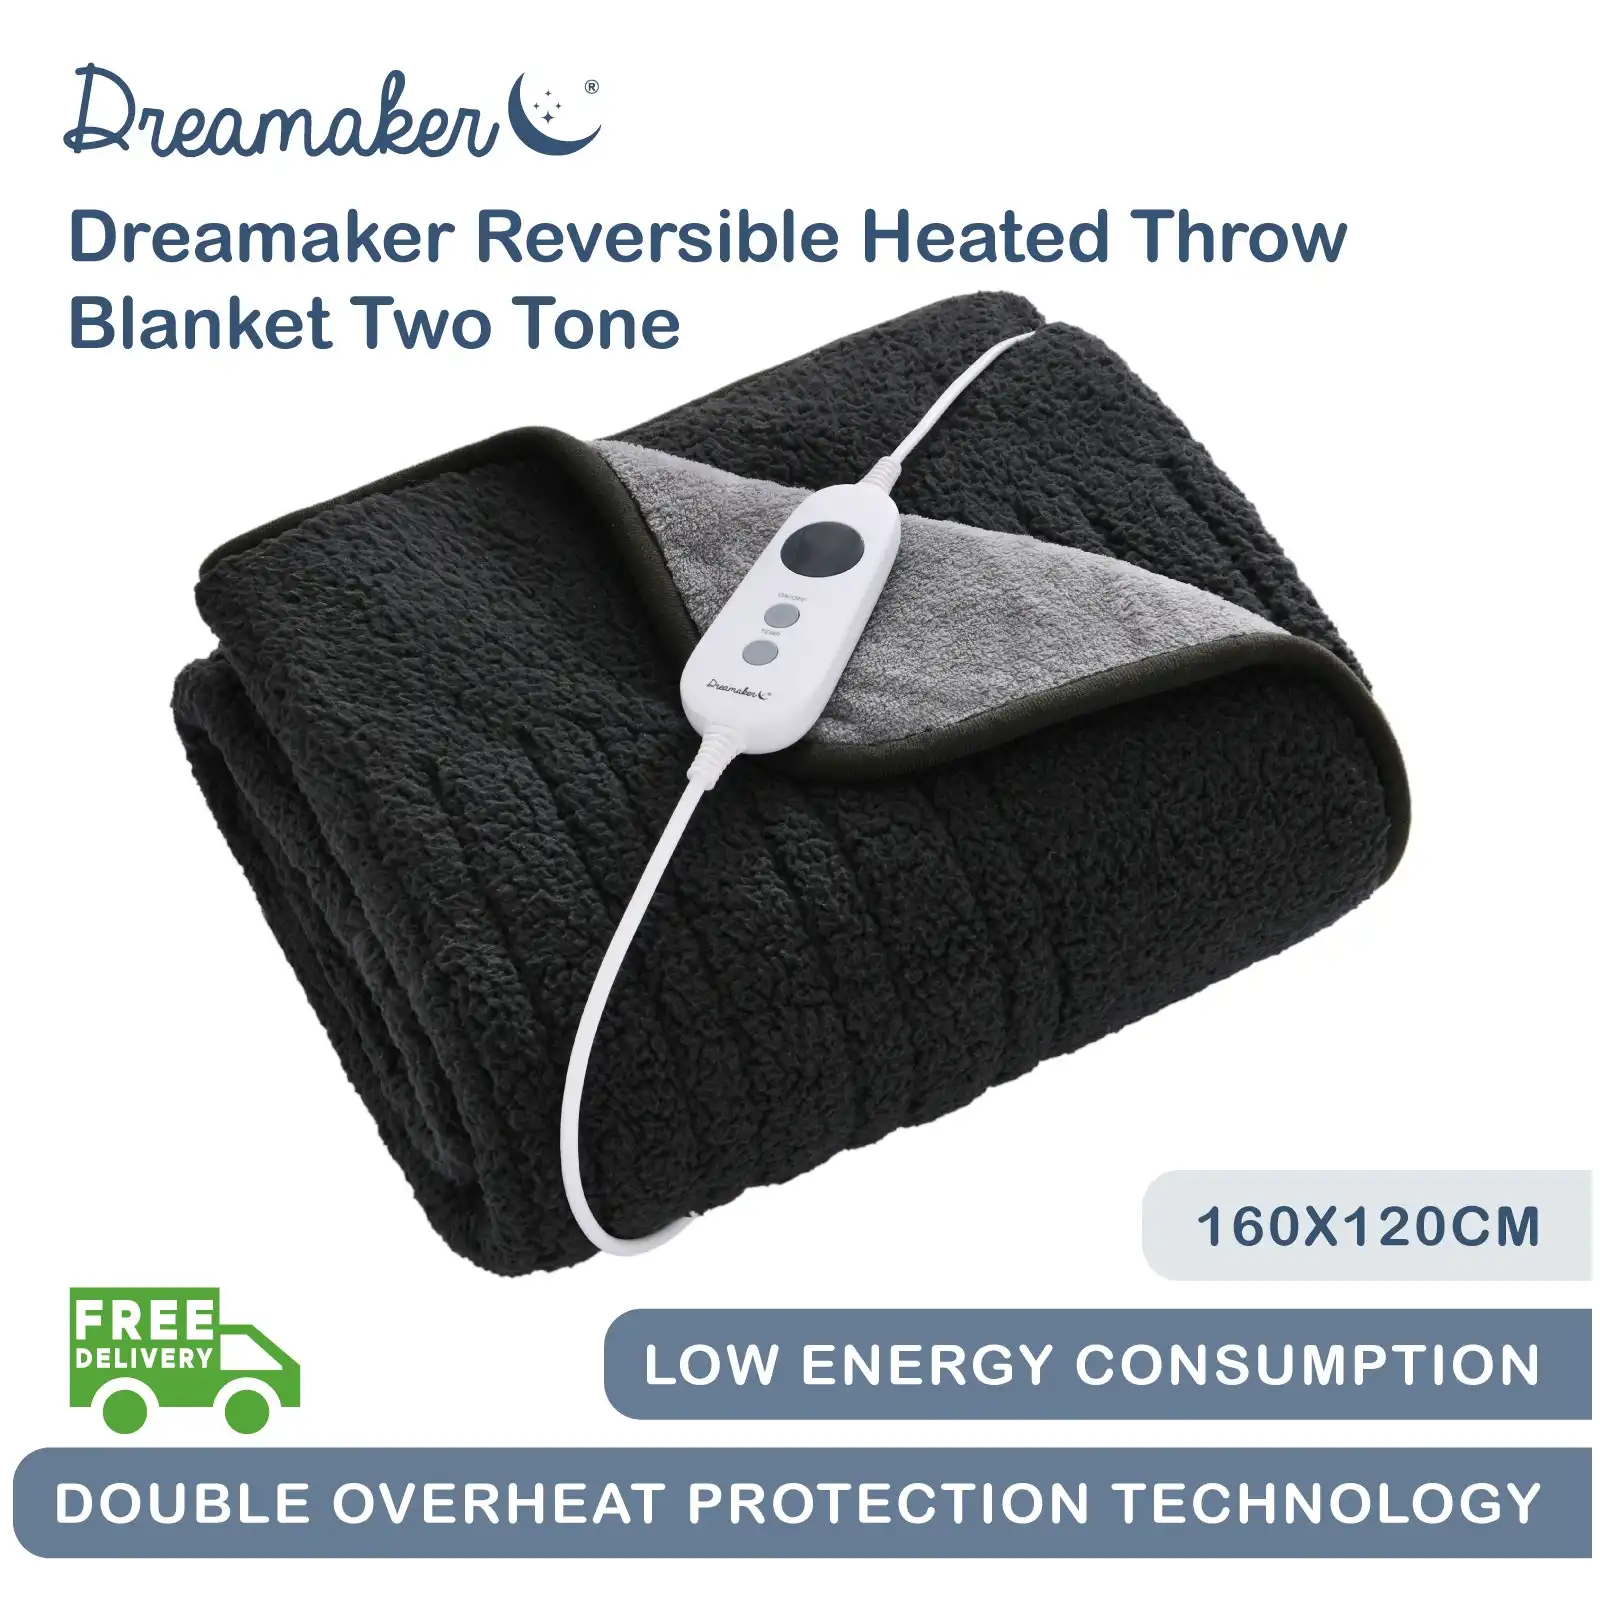 Dreamaker Reversible Heated Throw Blanket Two Tone (Charcoal/Silver)- 160x120cm